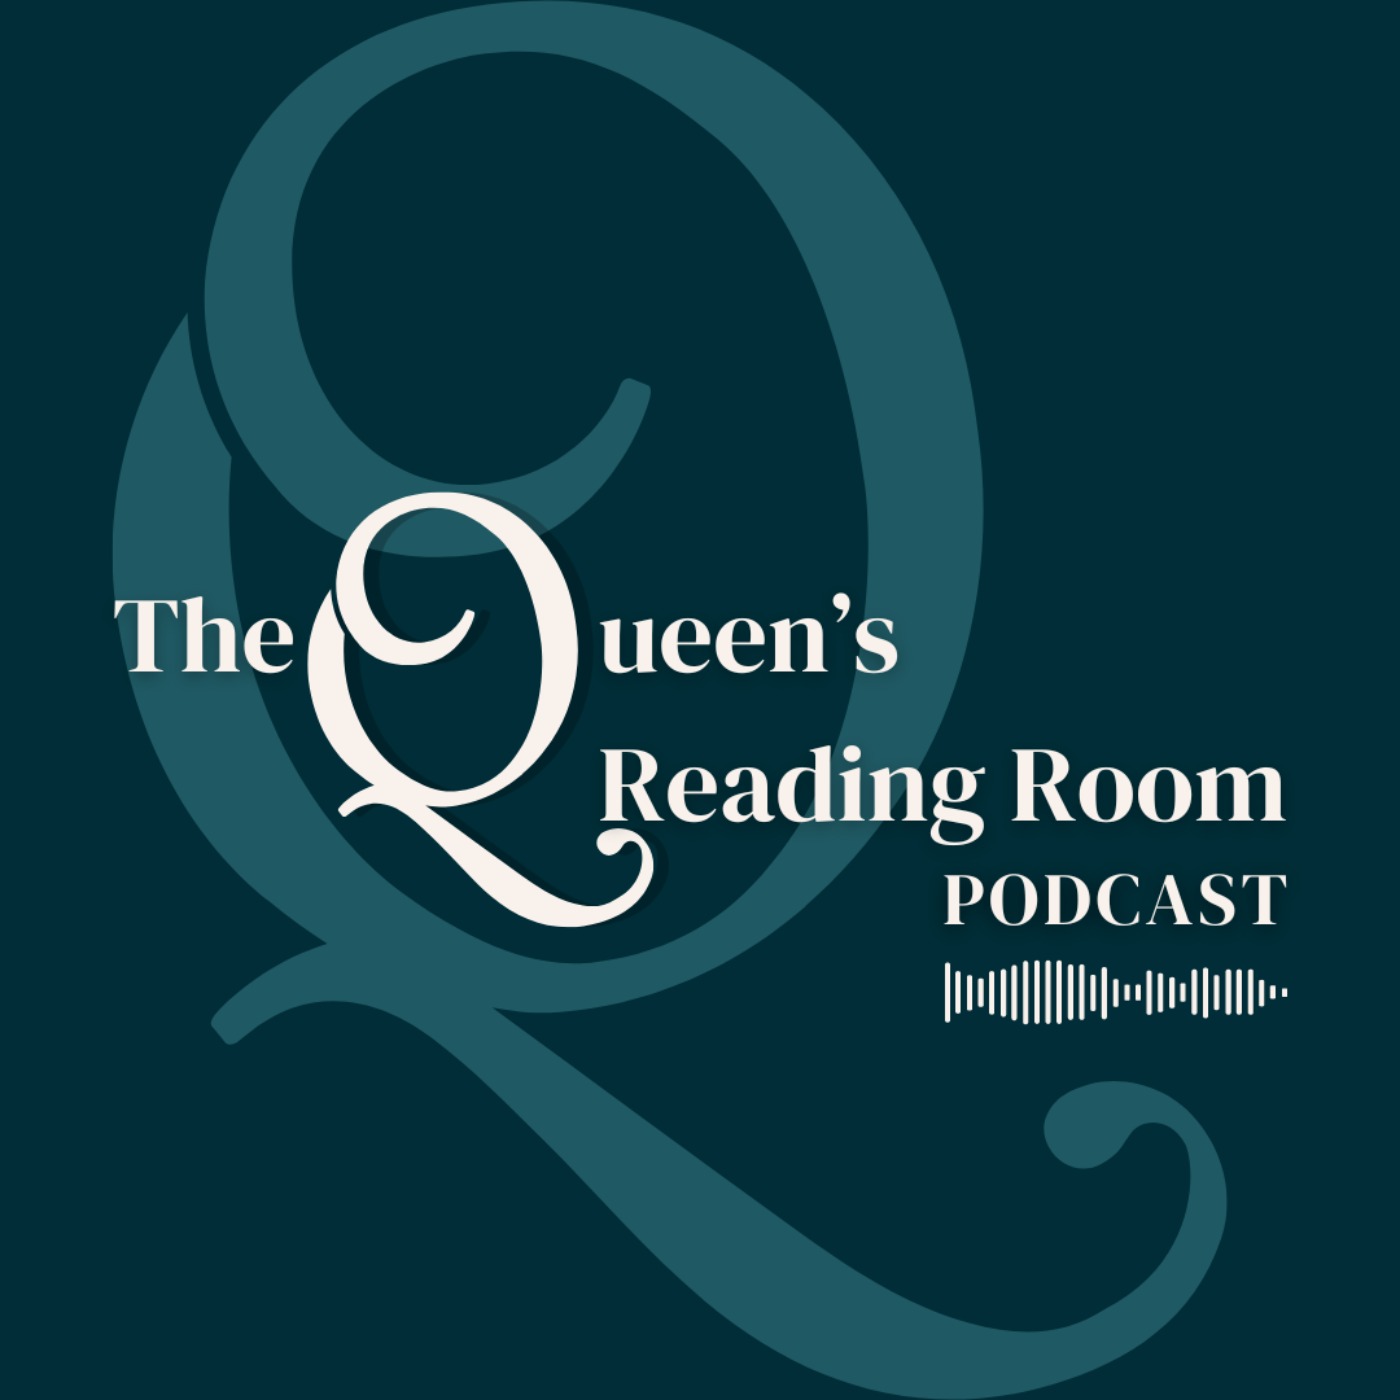 The Queen's Reading Room Podcast - Trailer